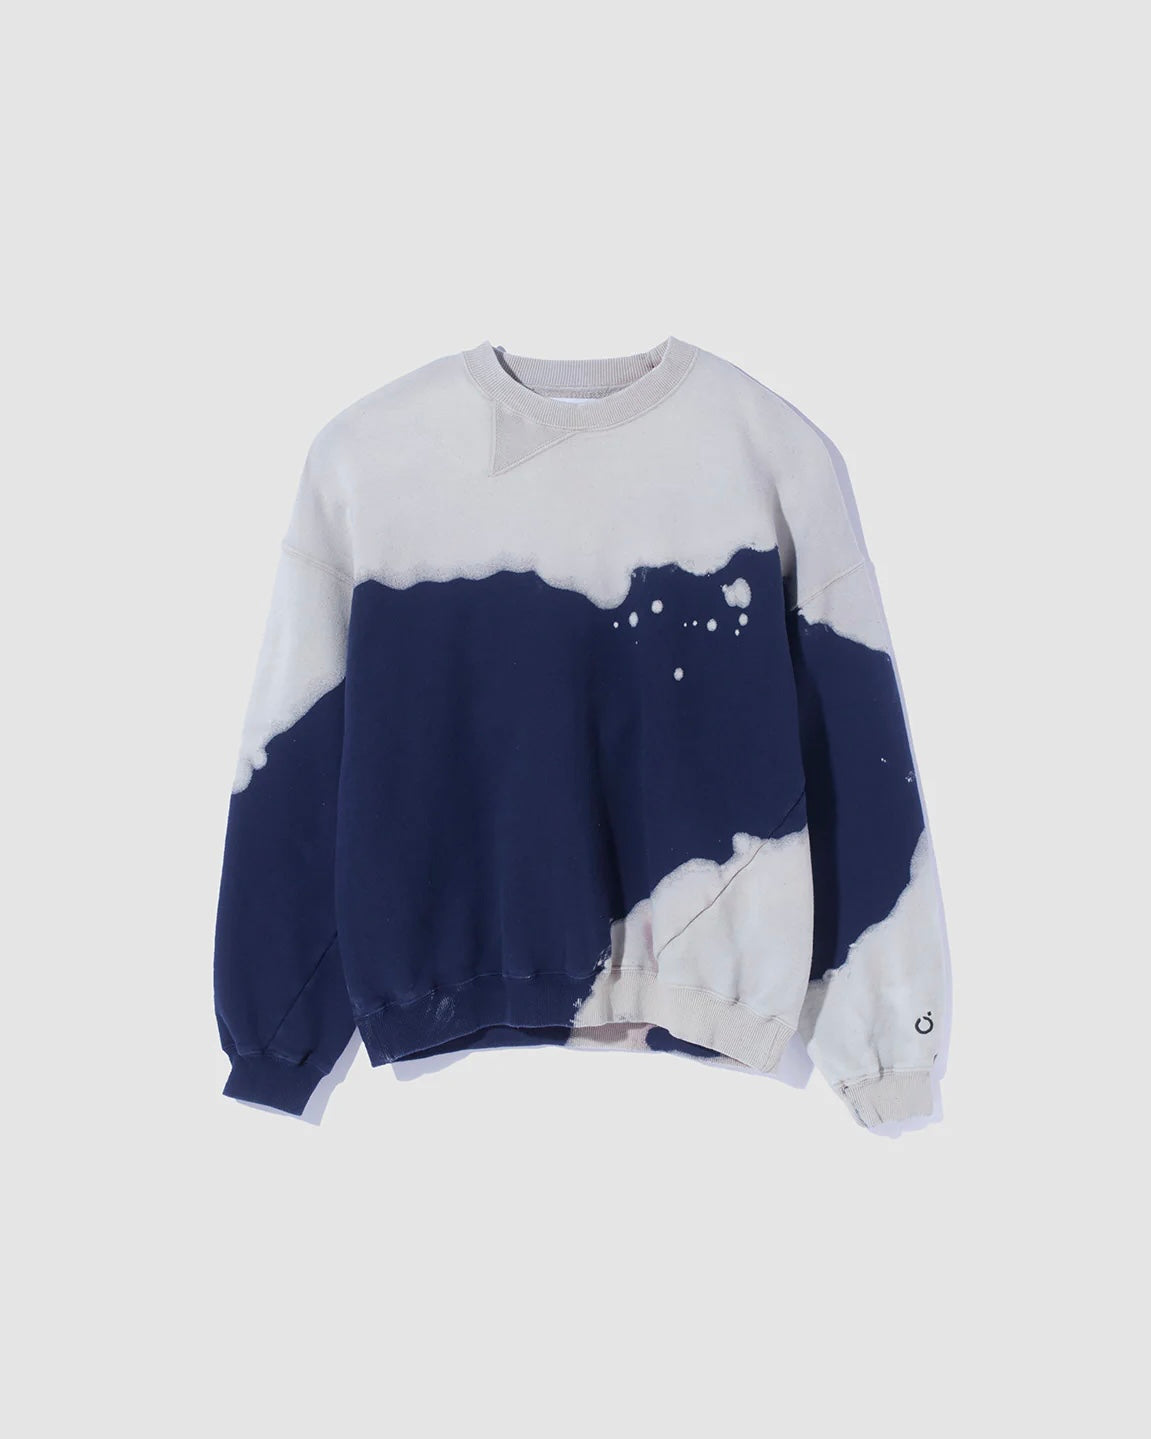 【NOMA T.D.】HAND DYED TWIST SWEAT - NAVY